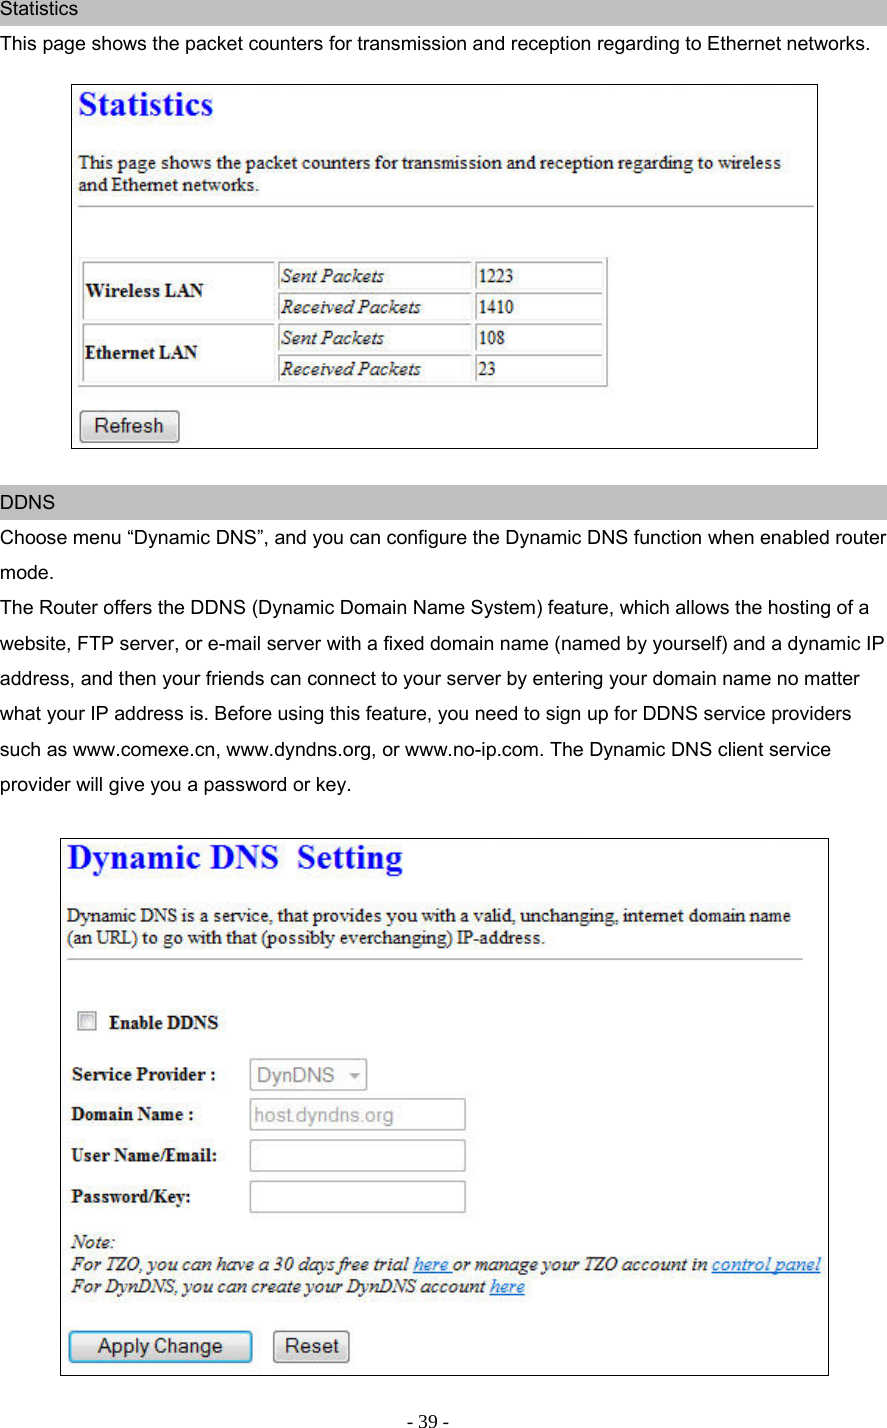 - 39 - Statistics This page shows the packet counters for transmission and reception regarding to Ethernet networks.     DDNS Choose menu “Dynamic DNS”, and you can configure the Dynamic DNS function when enabled router mode. The Router offers the DDNS (Dynamic Domain Name System) feature, which allows the hosting of a website, FTP server, or e-mail server with a fixed domain name (named by yourself) and a dynamic IP address, and then your friends can connect to your server by entering your domain name no matter what your IP address is. Before using this feature, you need to sign up for DDNS service providers such as www.comexe.cn, www.dyndns.org, or www.no-ip.com. The Dynamic DNS client service provider will give you a password or key.   